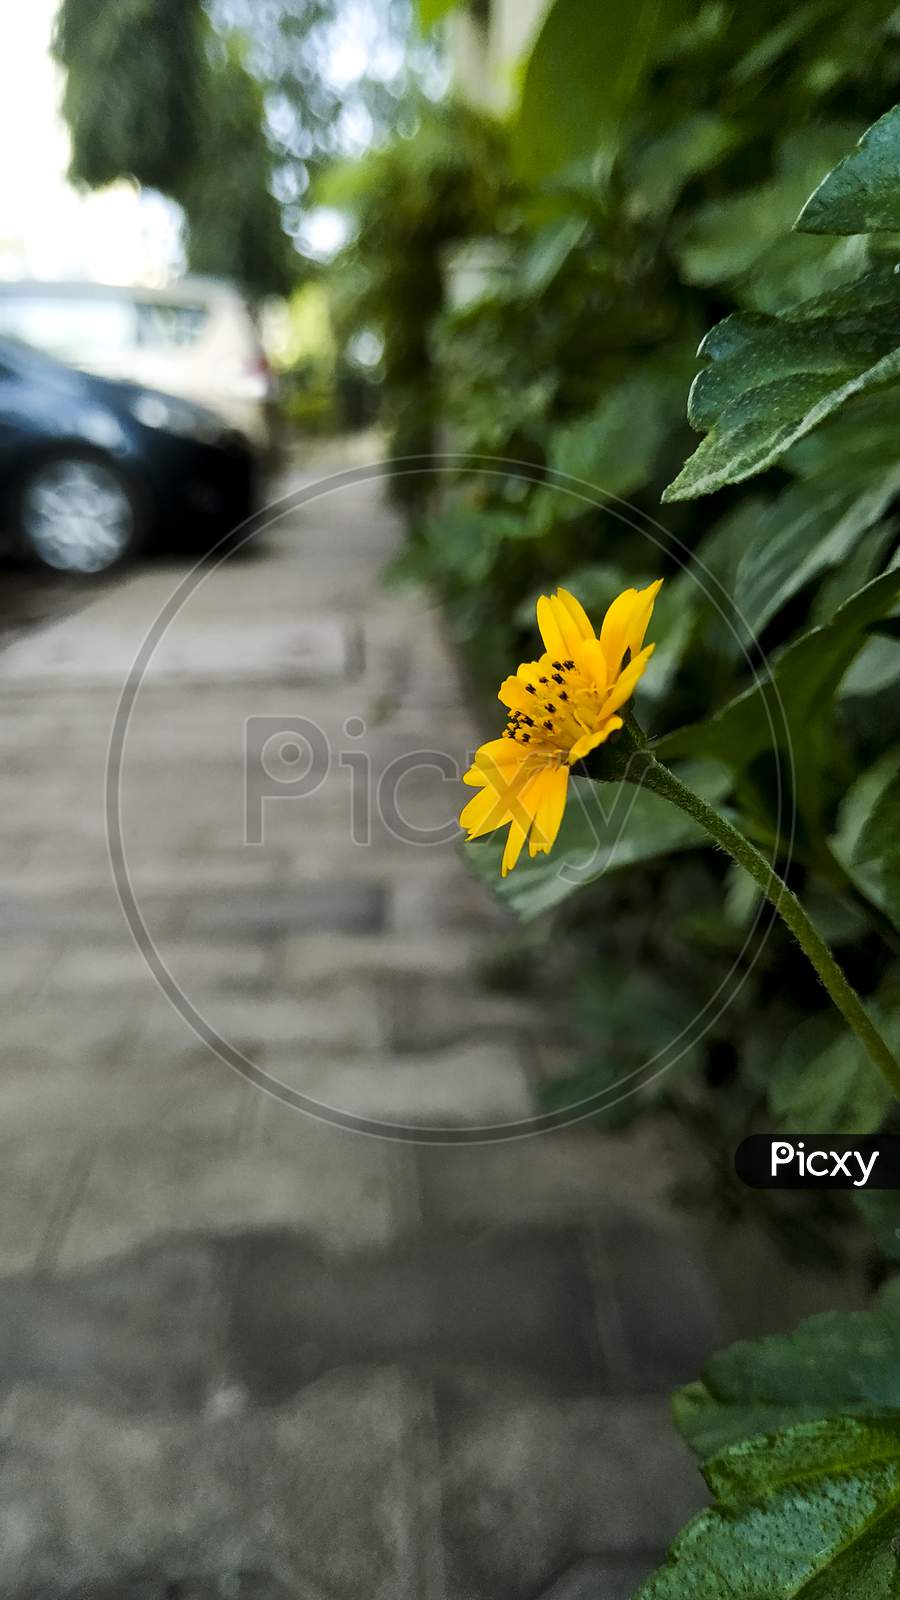 Focus On Yellow Flower And Green Leafs Plant Side View